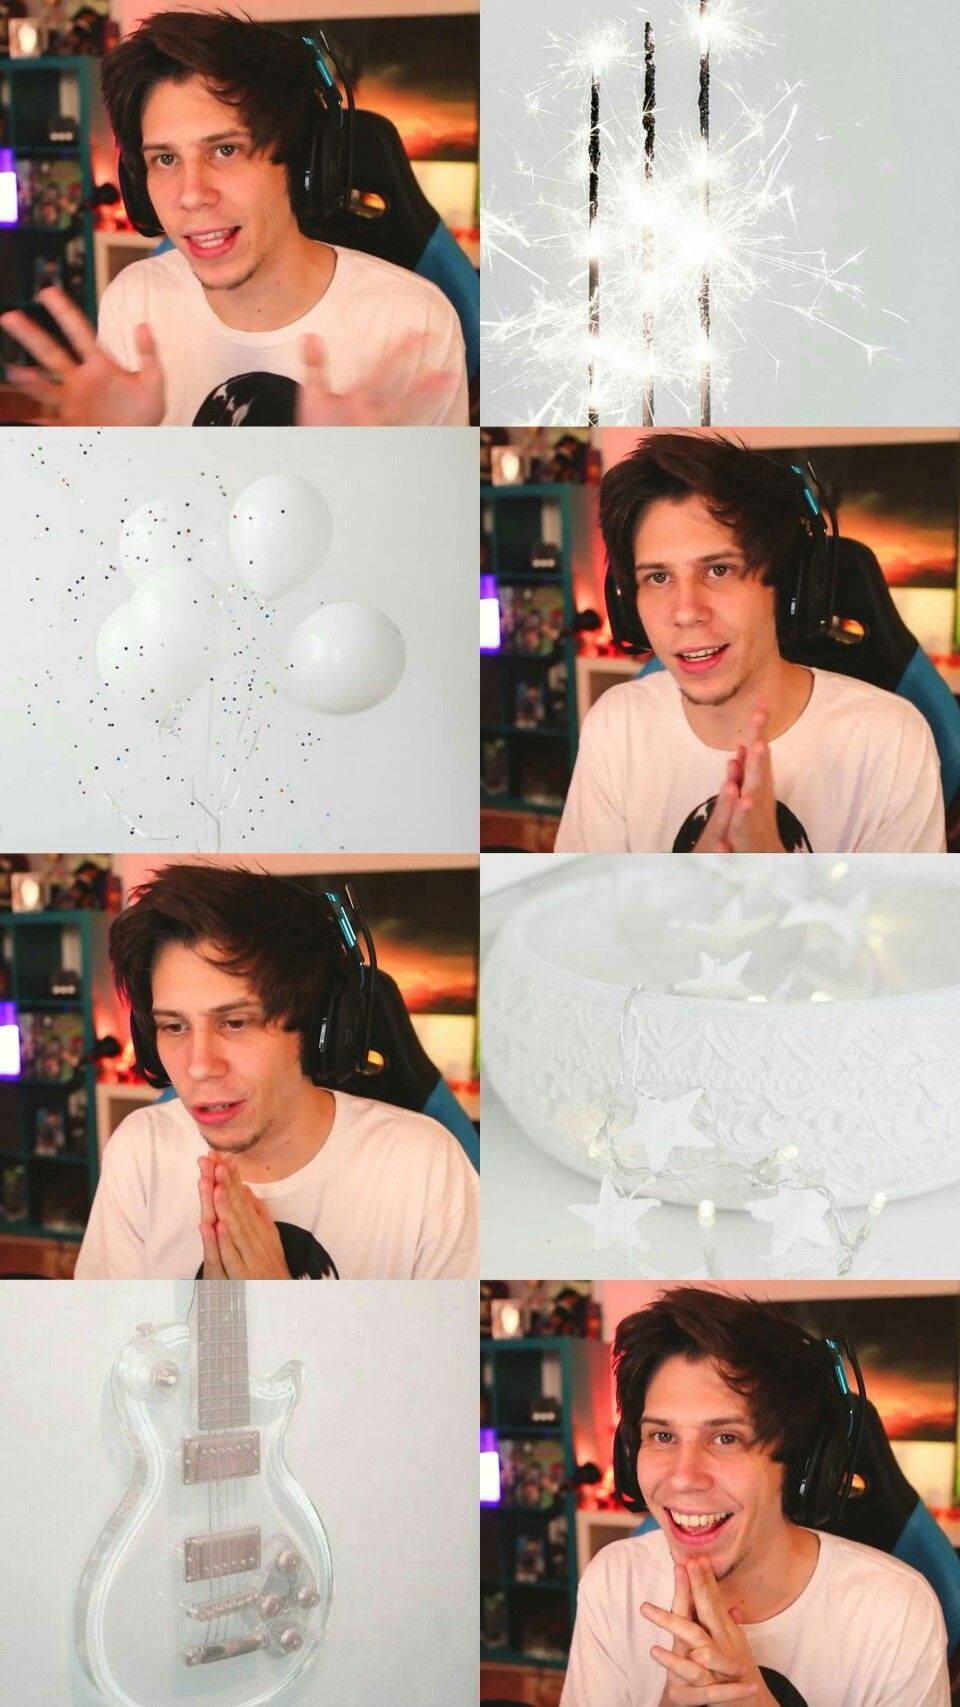 ElrubiusOMG poses with a white aesthetic. Wallpaper